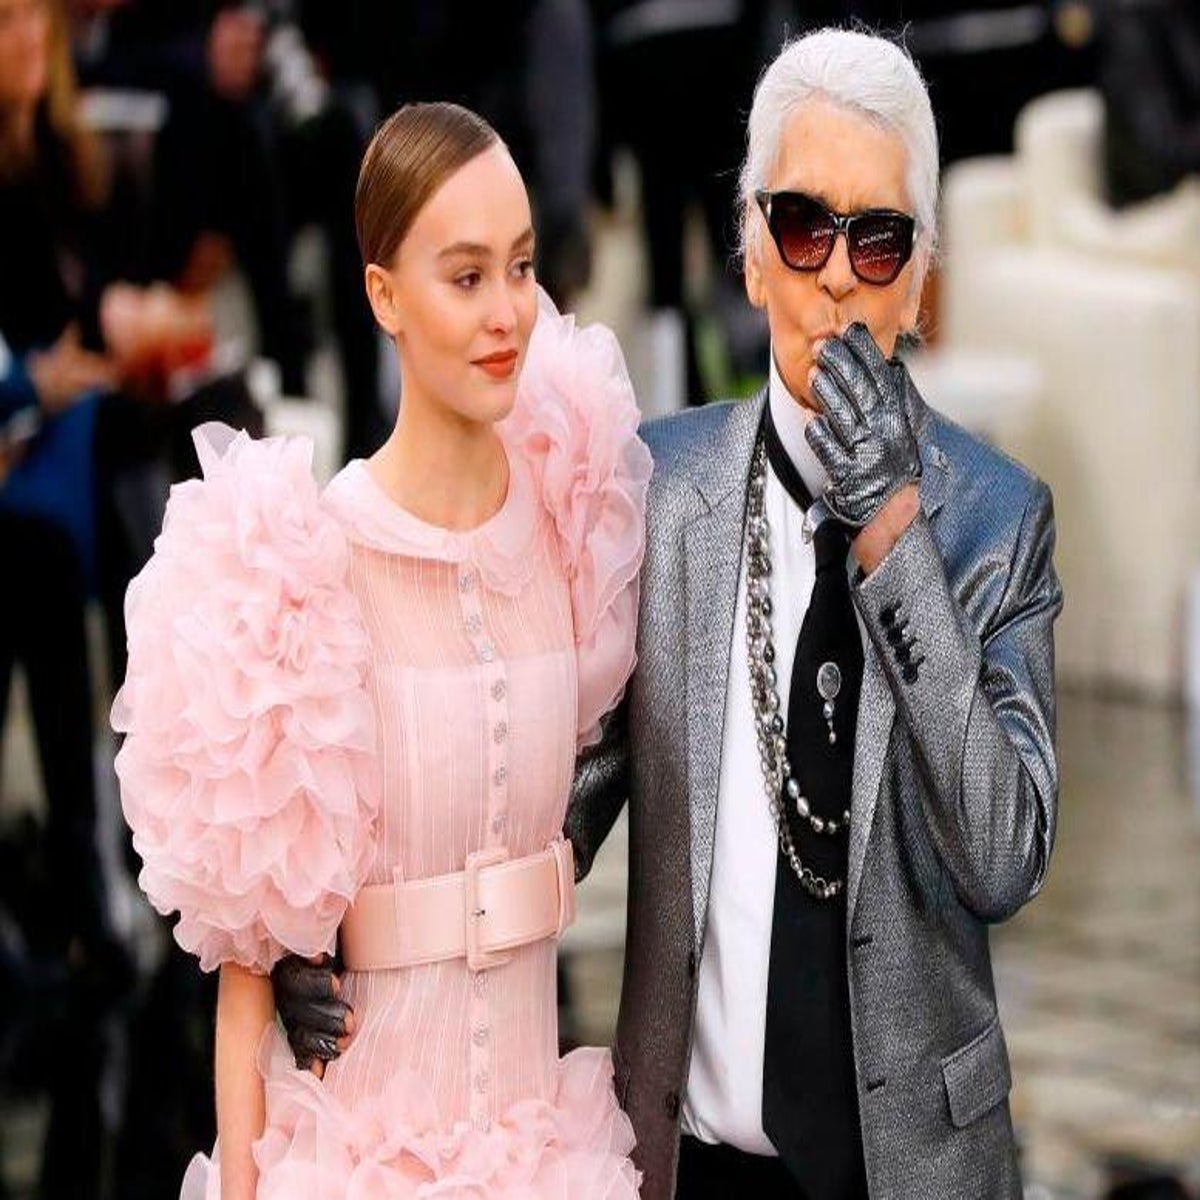 The story behind Karl Lagerfeld's iconic ponytail